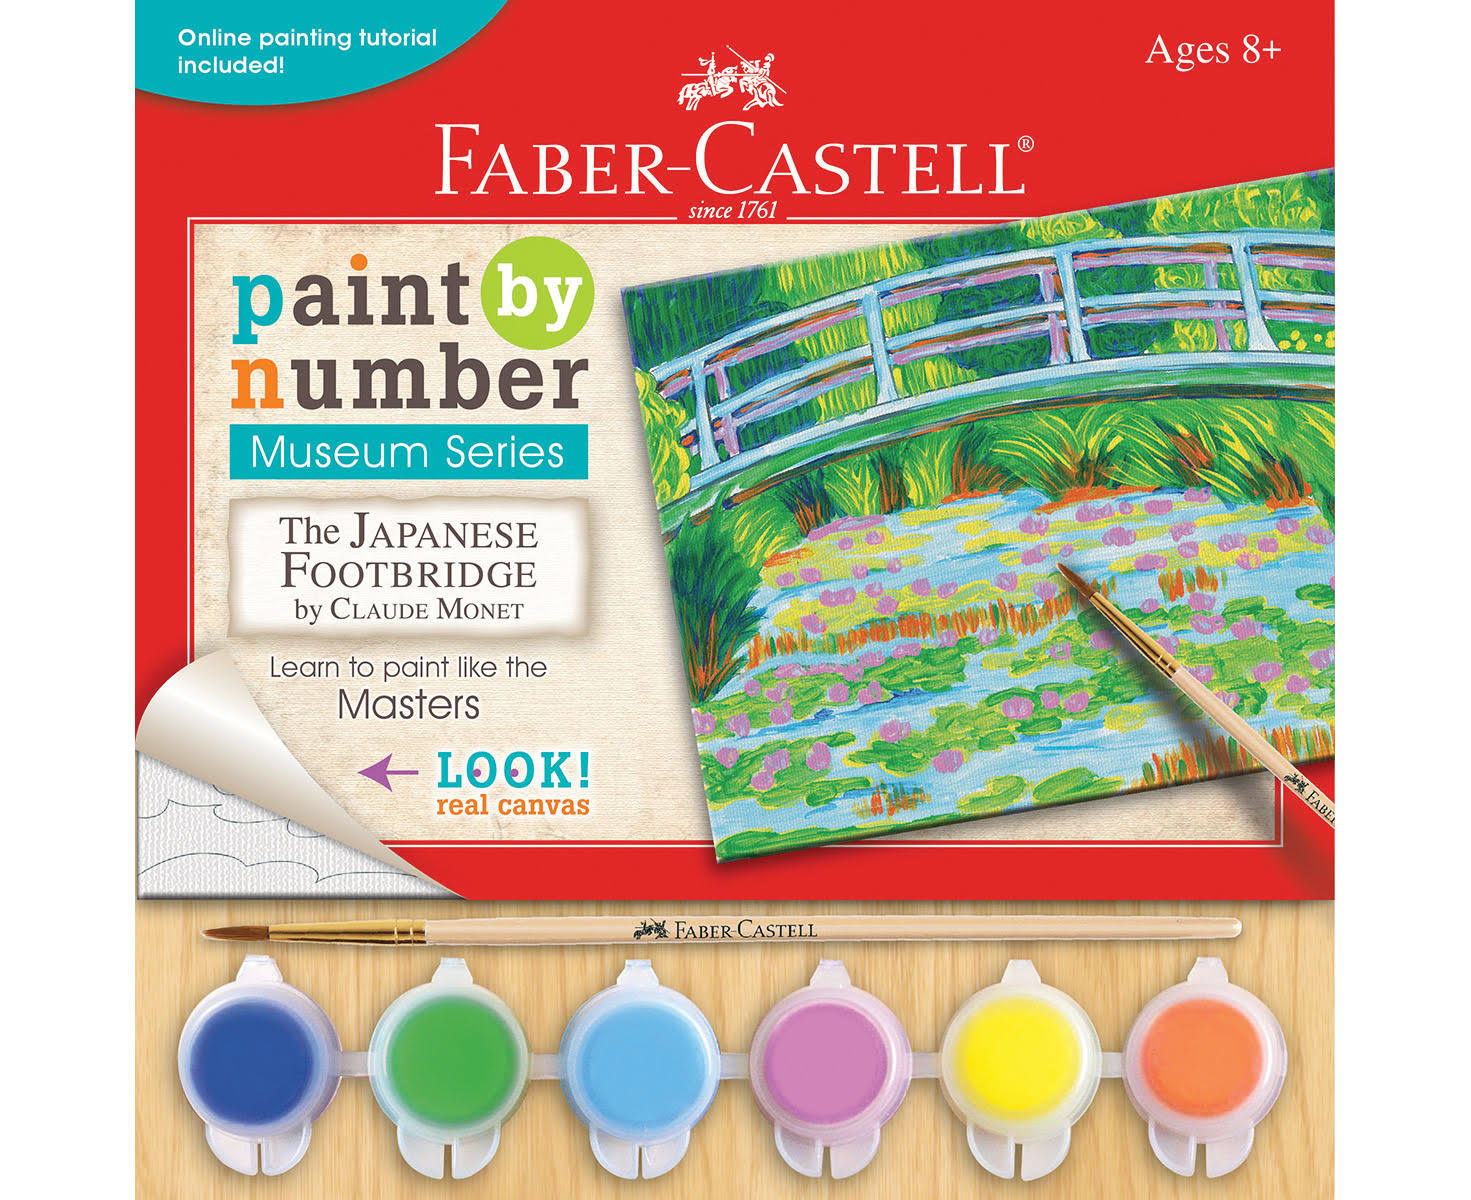 Farbell Caster Paint by Number Museum Series the Japanese Footbridge Kit